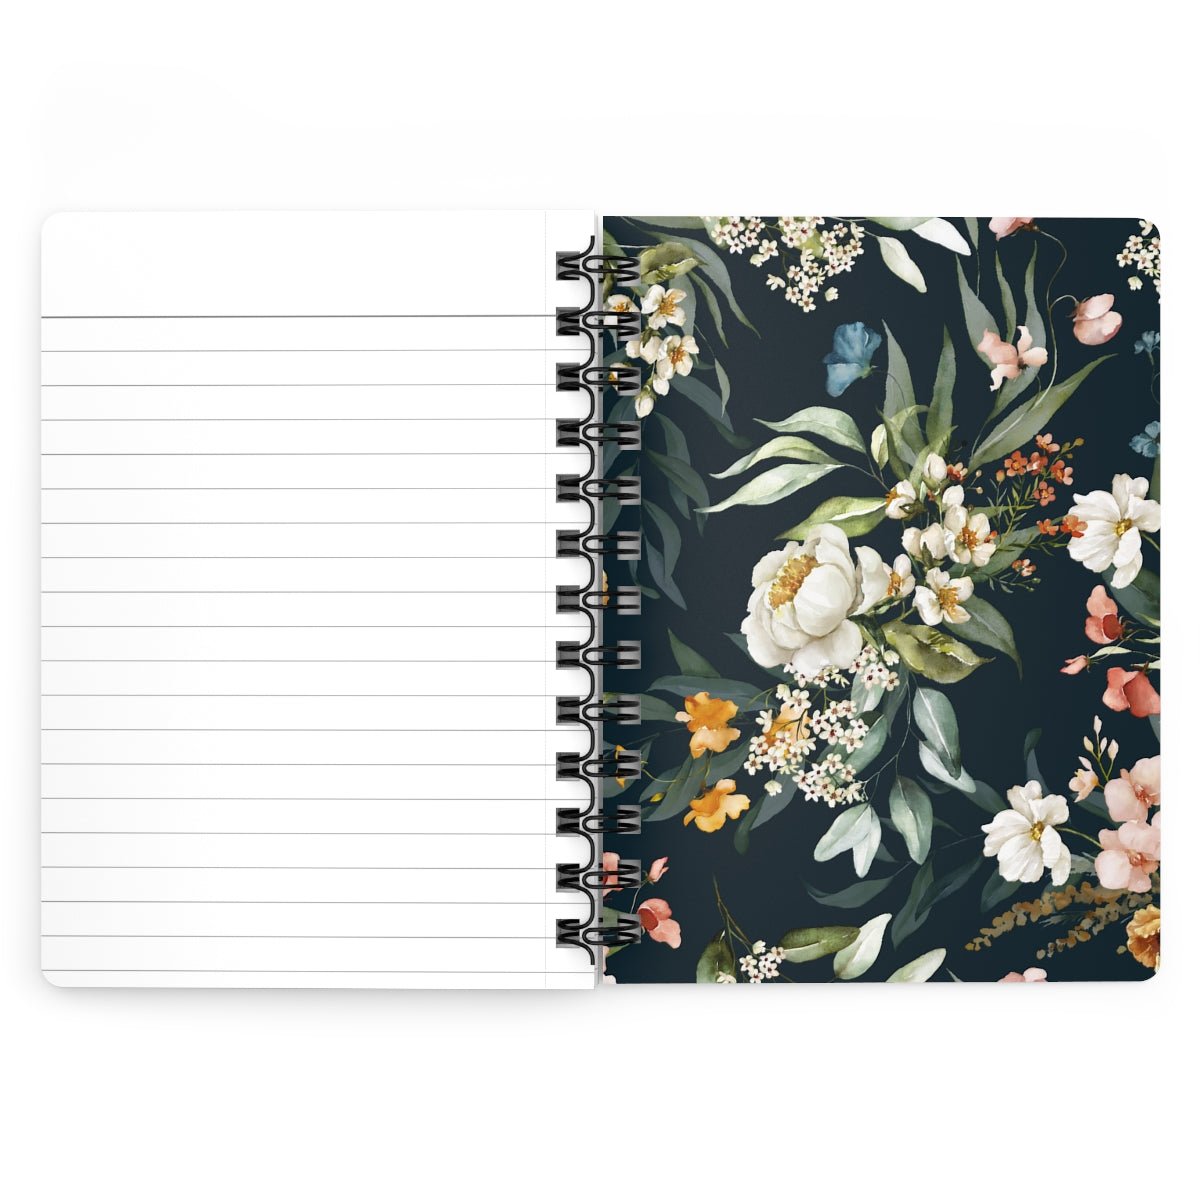 Watercolor Flowers Spiral Bound Journal - Puffin Lime